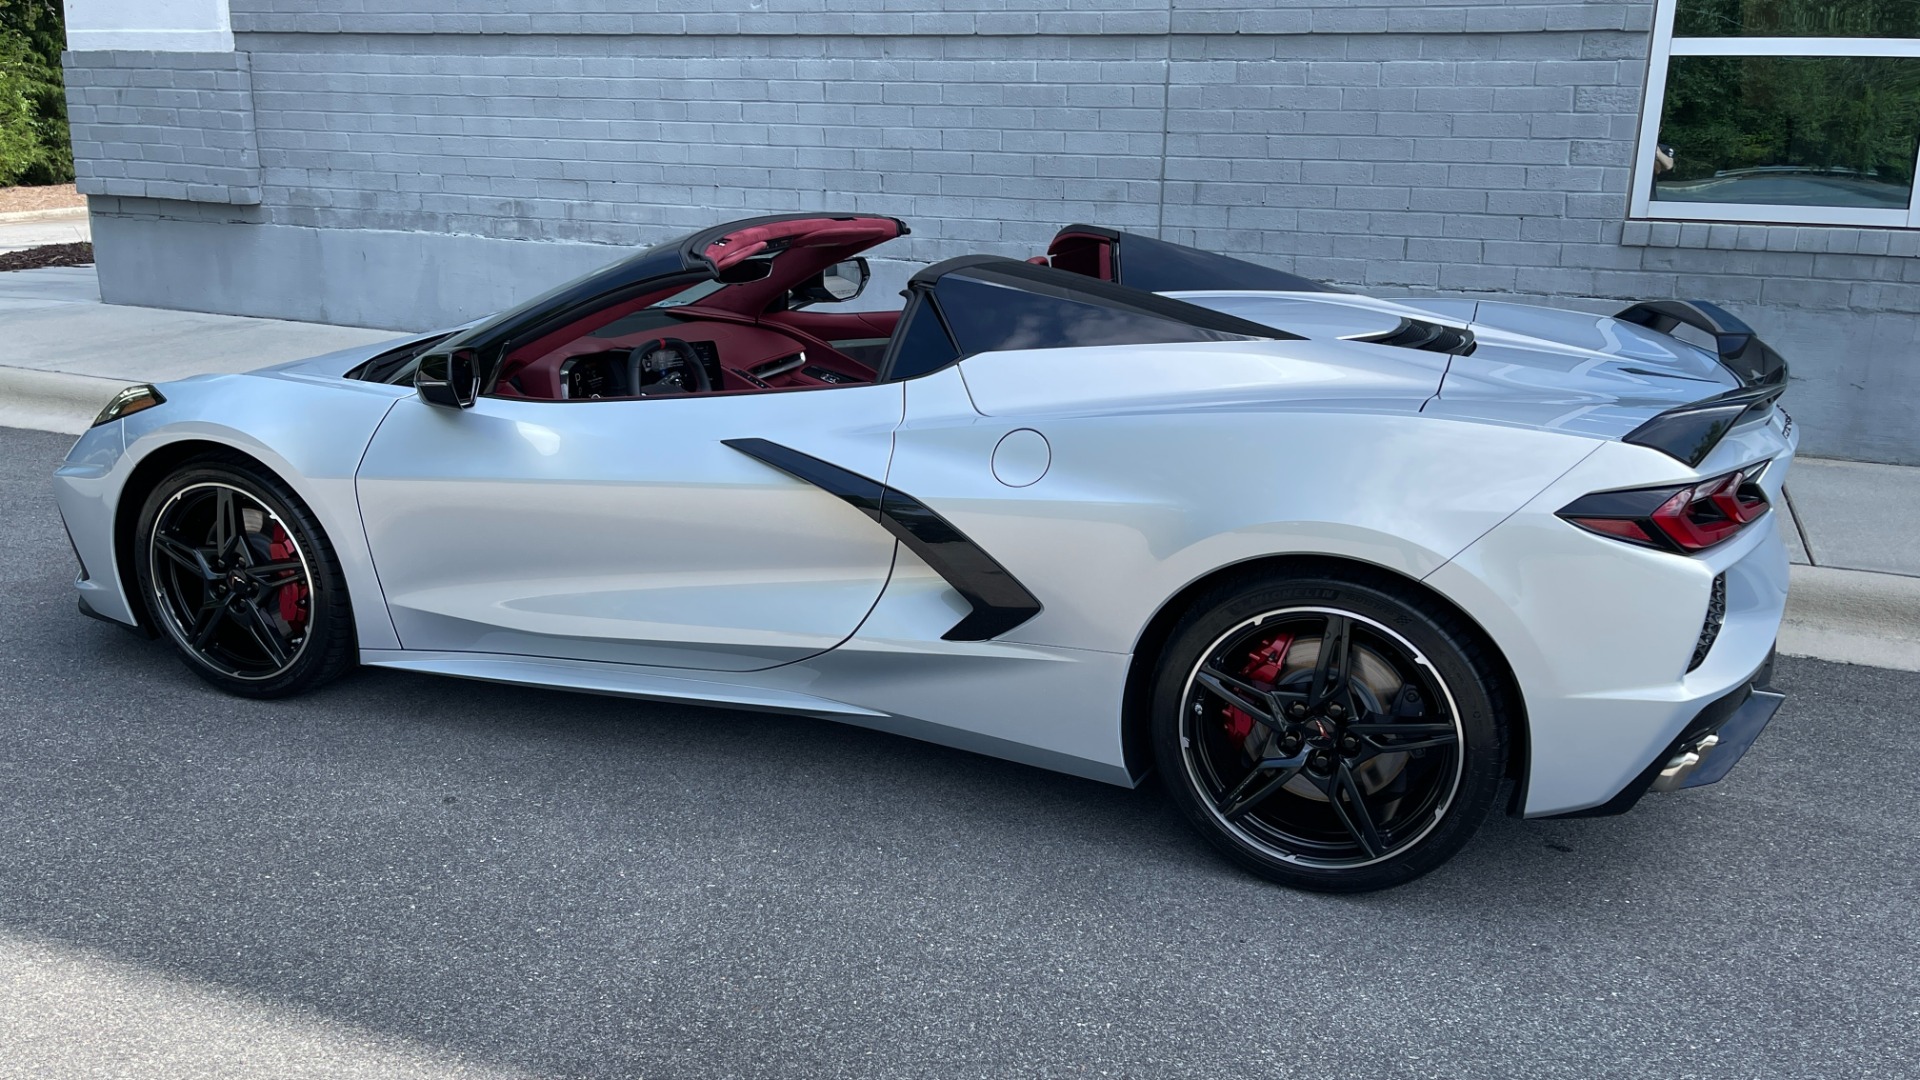 Used 2021 Chevrolet Corvette 3LT CONVERTIBLE MORELLO / Z51 / FRONT LIFT for sale $100,900 at Formula Imports in Charlotte NC 28227 4